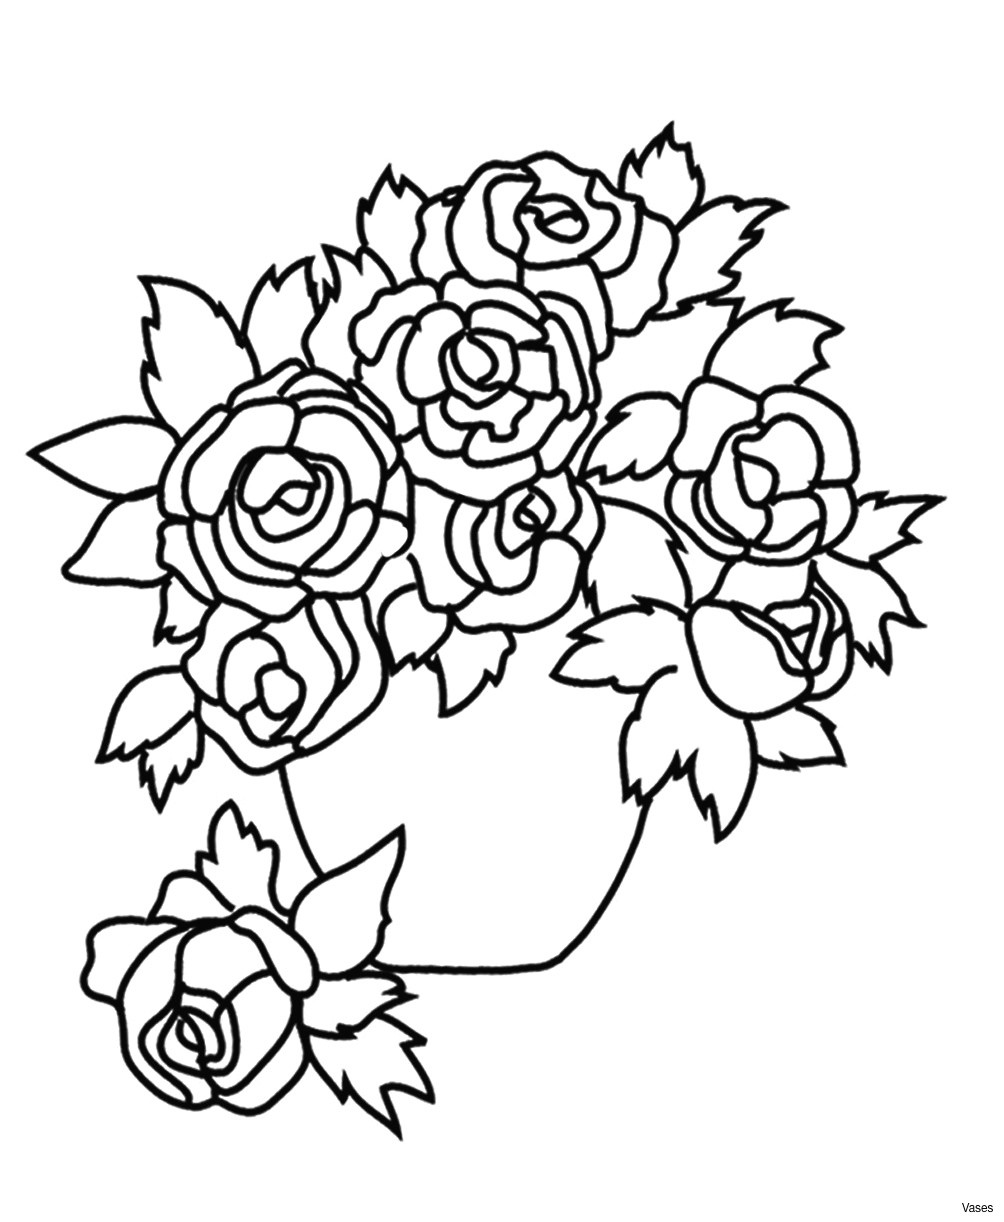 Drawings Of Hawaii Flowers 7 Lovely Hawaii National Flower Pictures Best Roses Flower